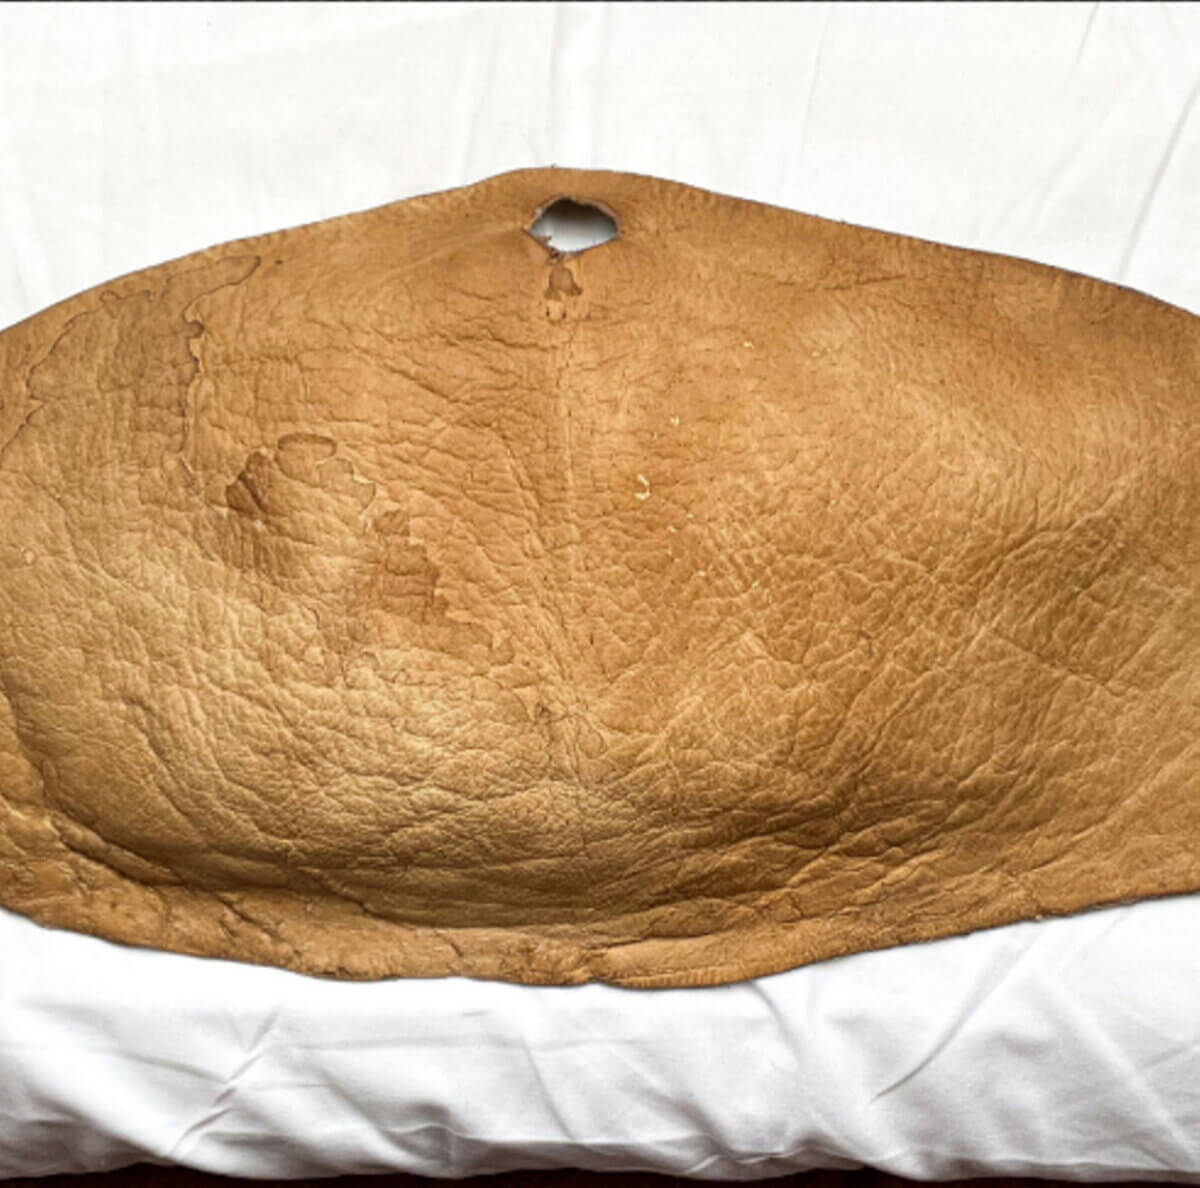 Skin from Katie Taylor's abdomen, after being turned to leather.